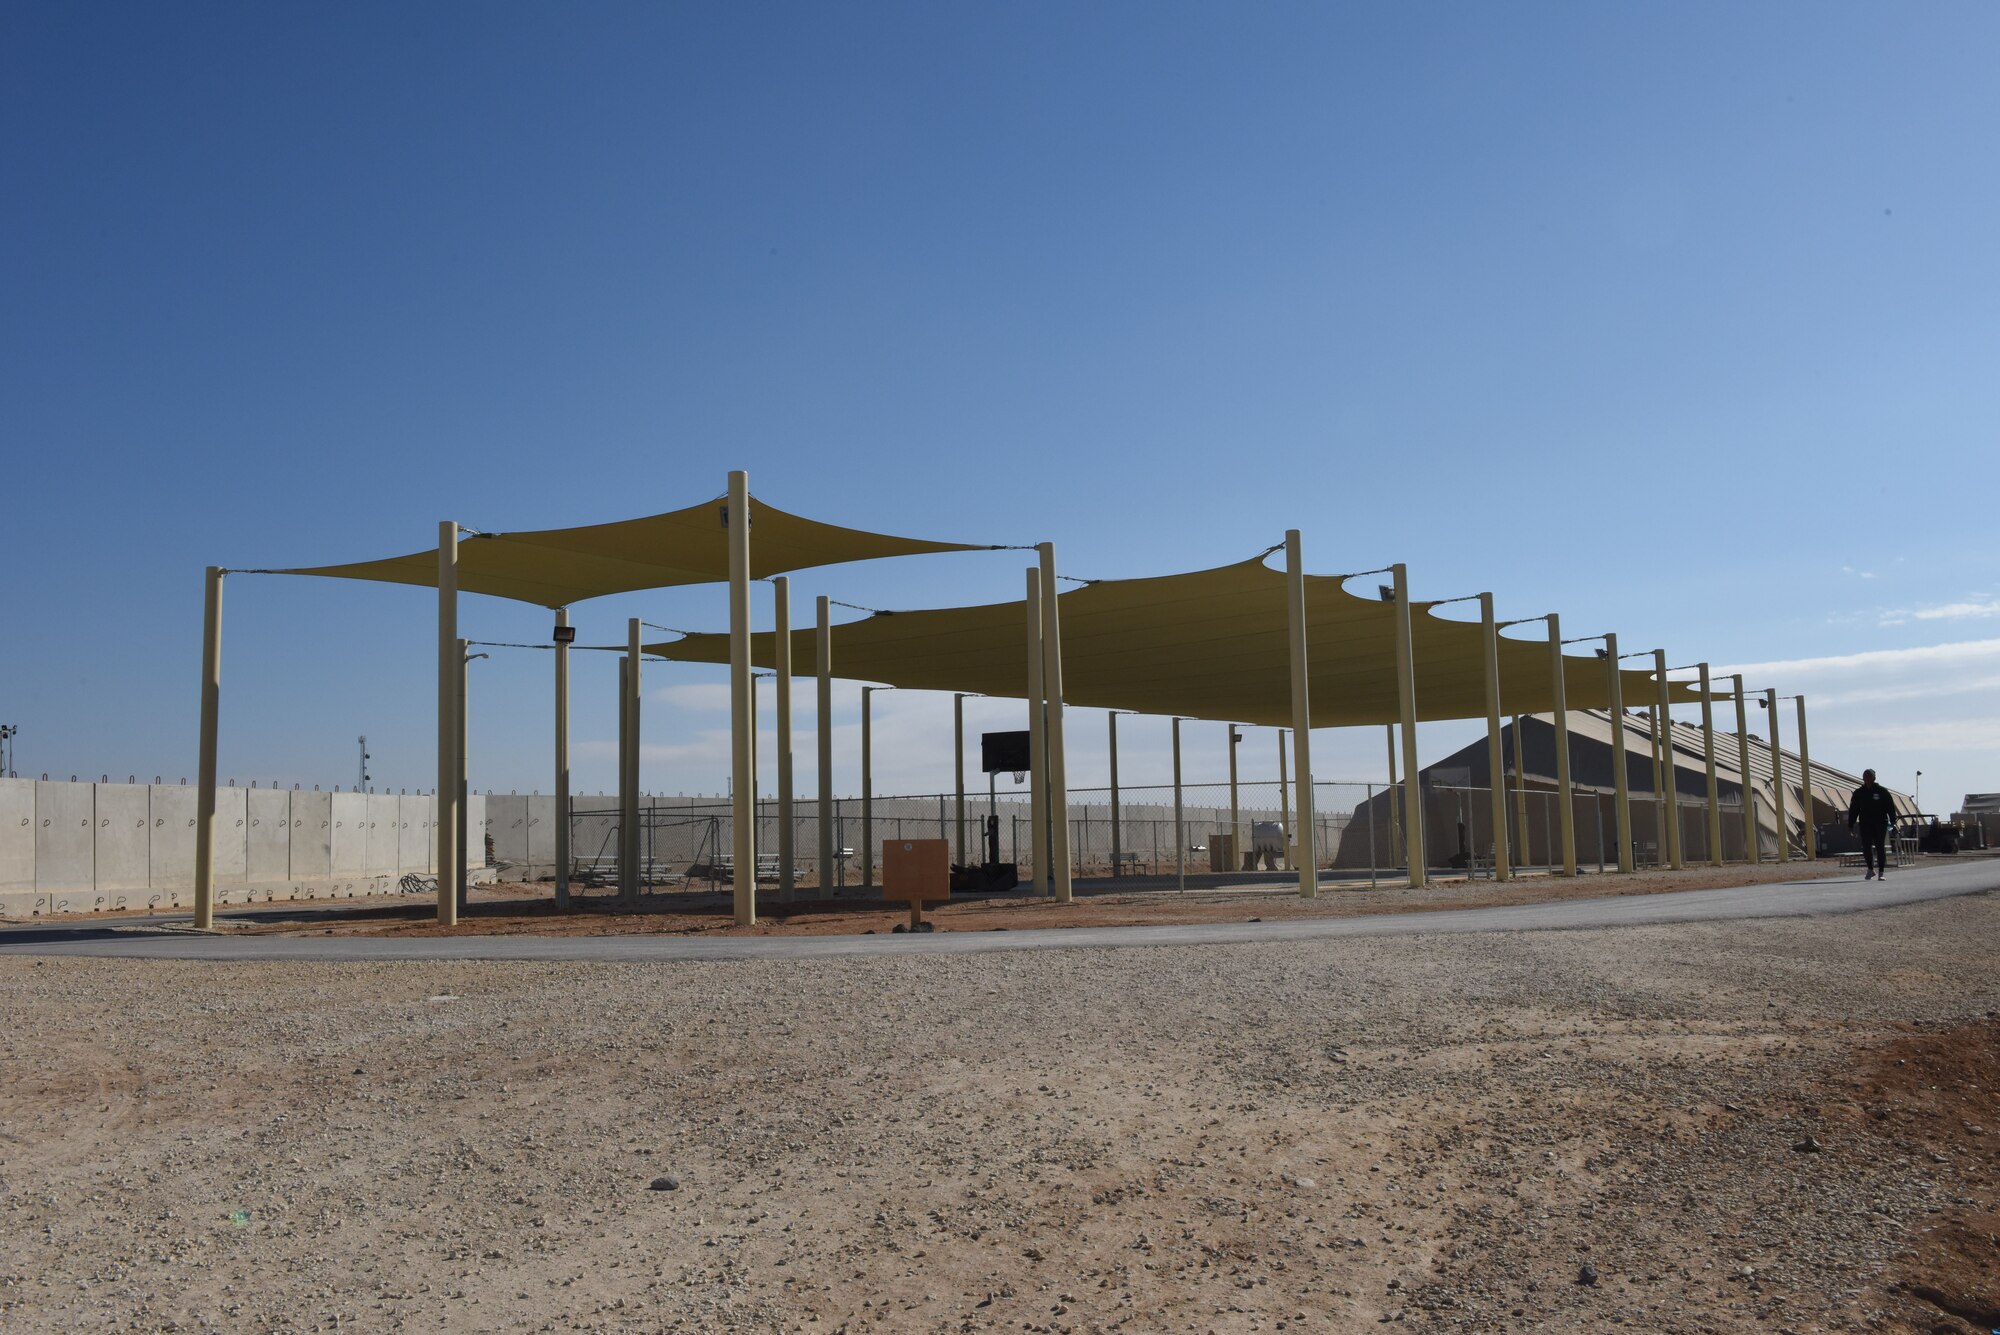 An Airman walks around the track near the recently constructed sunshade outside the Legends Fitness Center at the 332nd Air Expeditionary Wing Jan 18, 2018. The completed construction project is the largest sunshade in the area of responsibility. (U.S. Air Force photo by Staff Sgt. Antonio Gonzalez/Released)